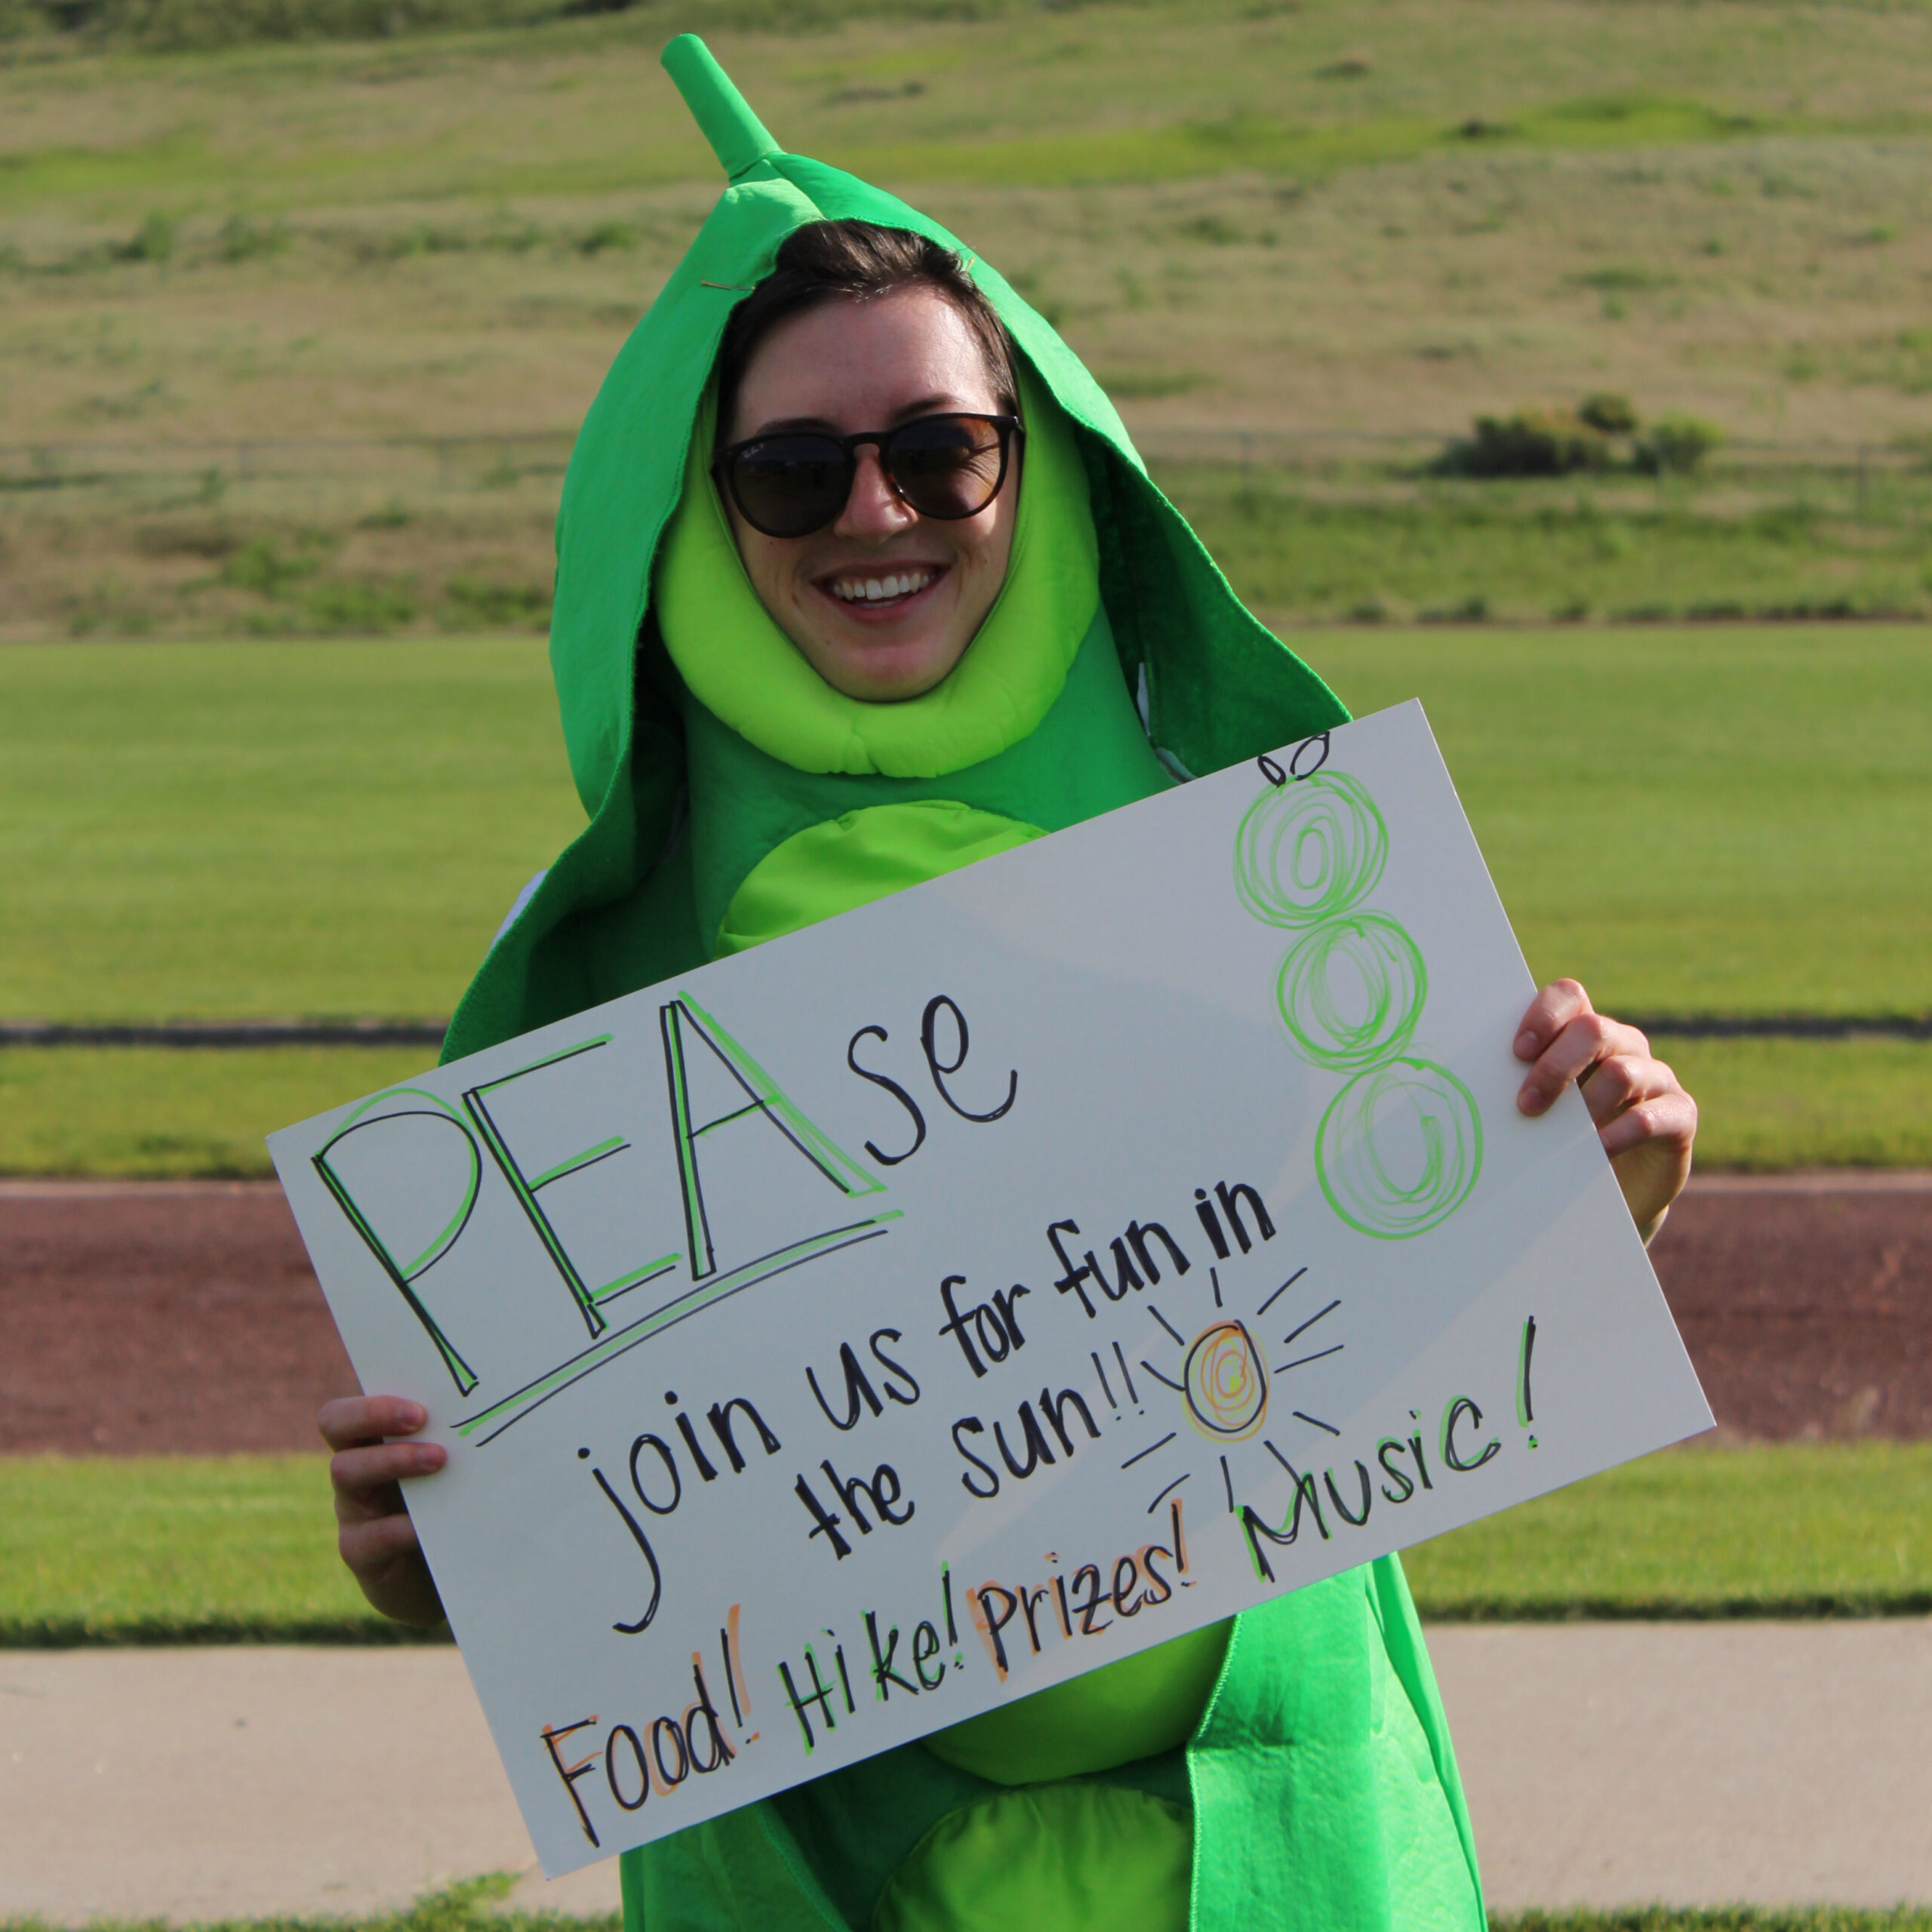 https://www.hungerfreecolorado.org/wp-content/uploads/2021/05/PEA-POD-Costume-scaled.jpg